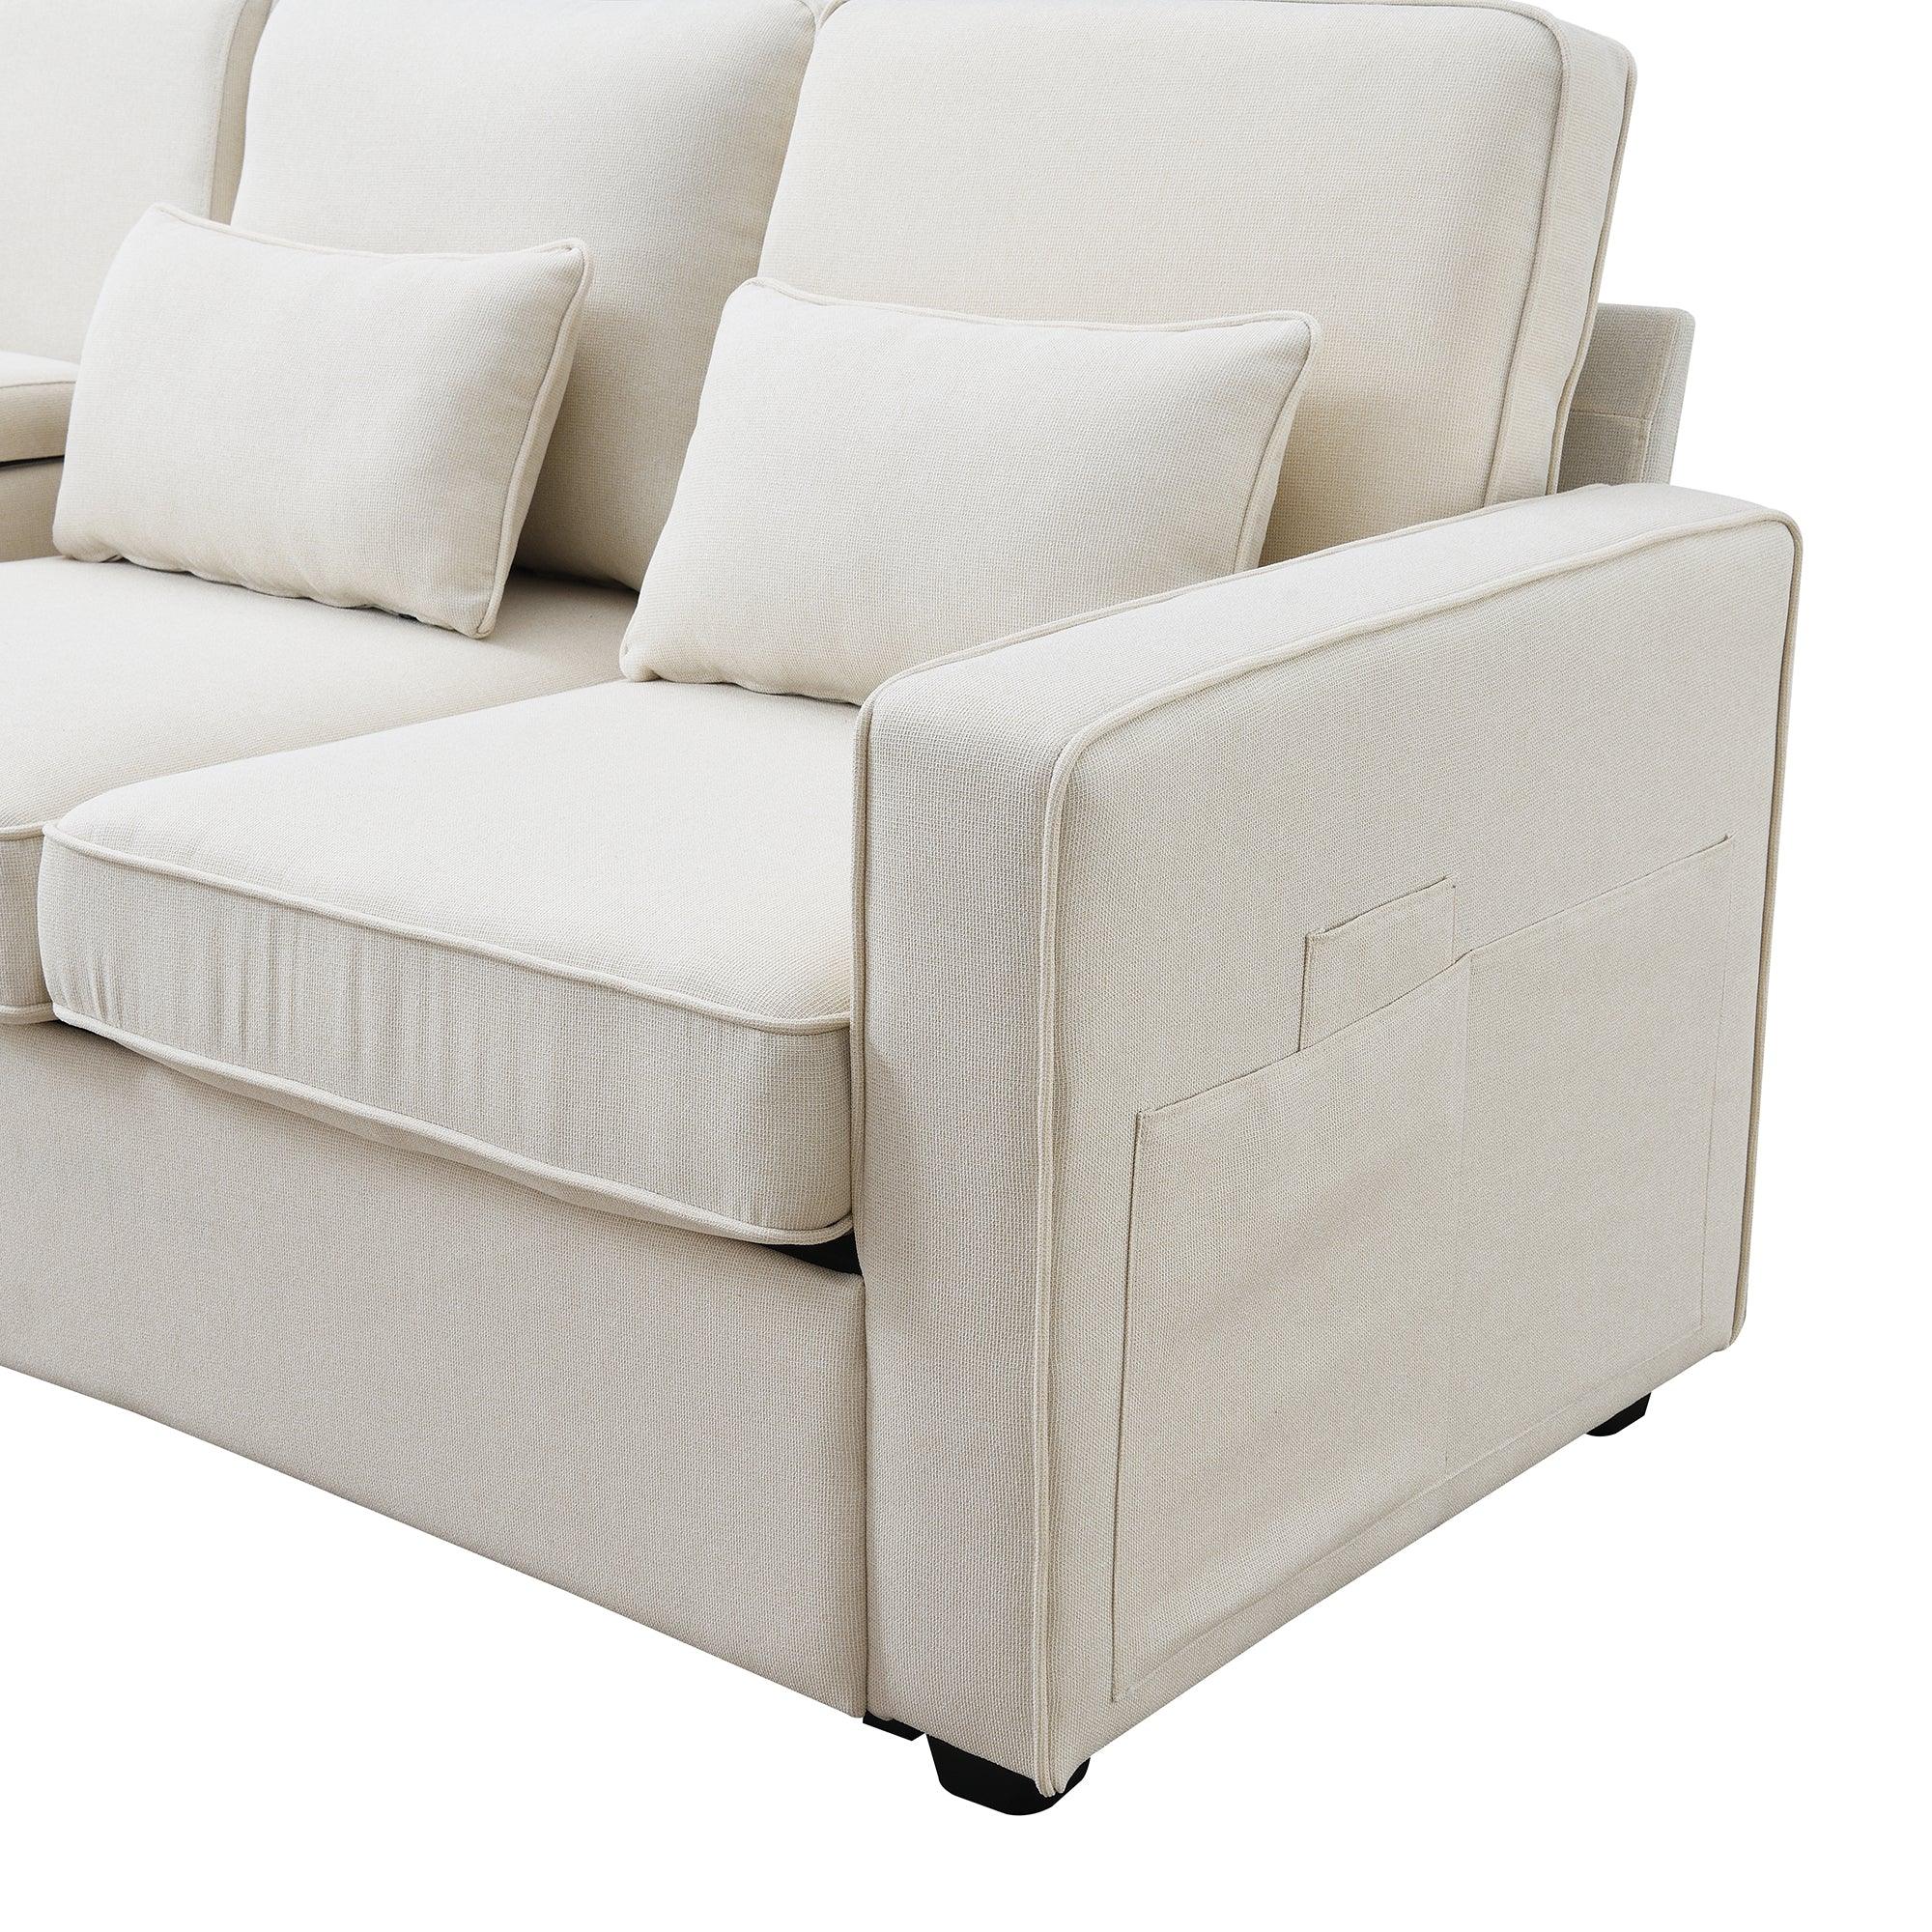 Modern Linen Fabric Sofa with Armrest Pockets and 4 Pillows